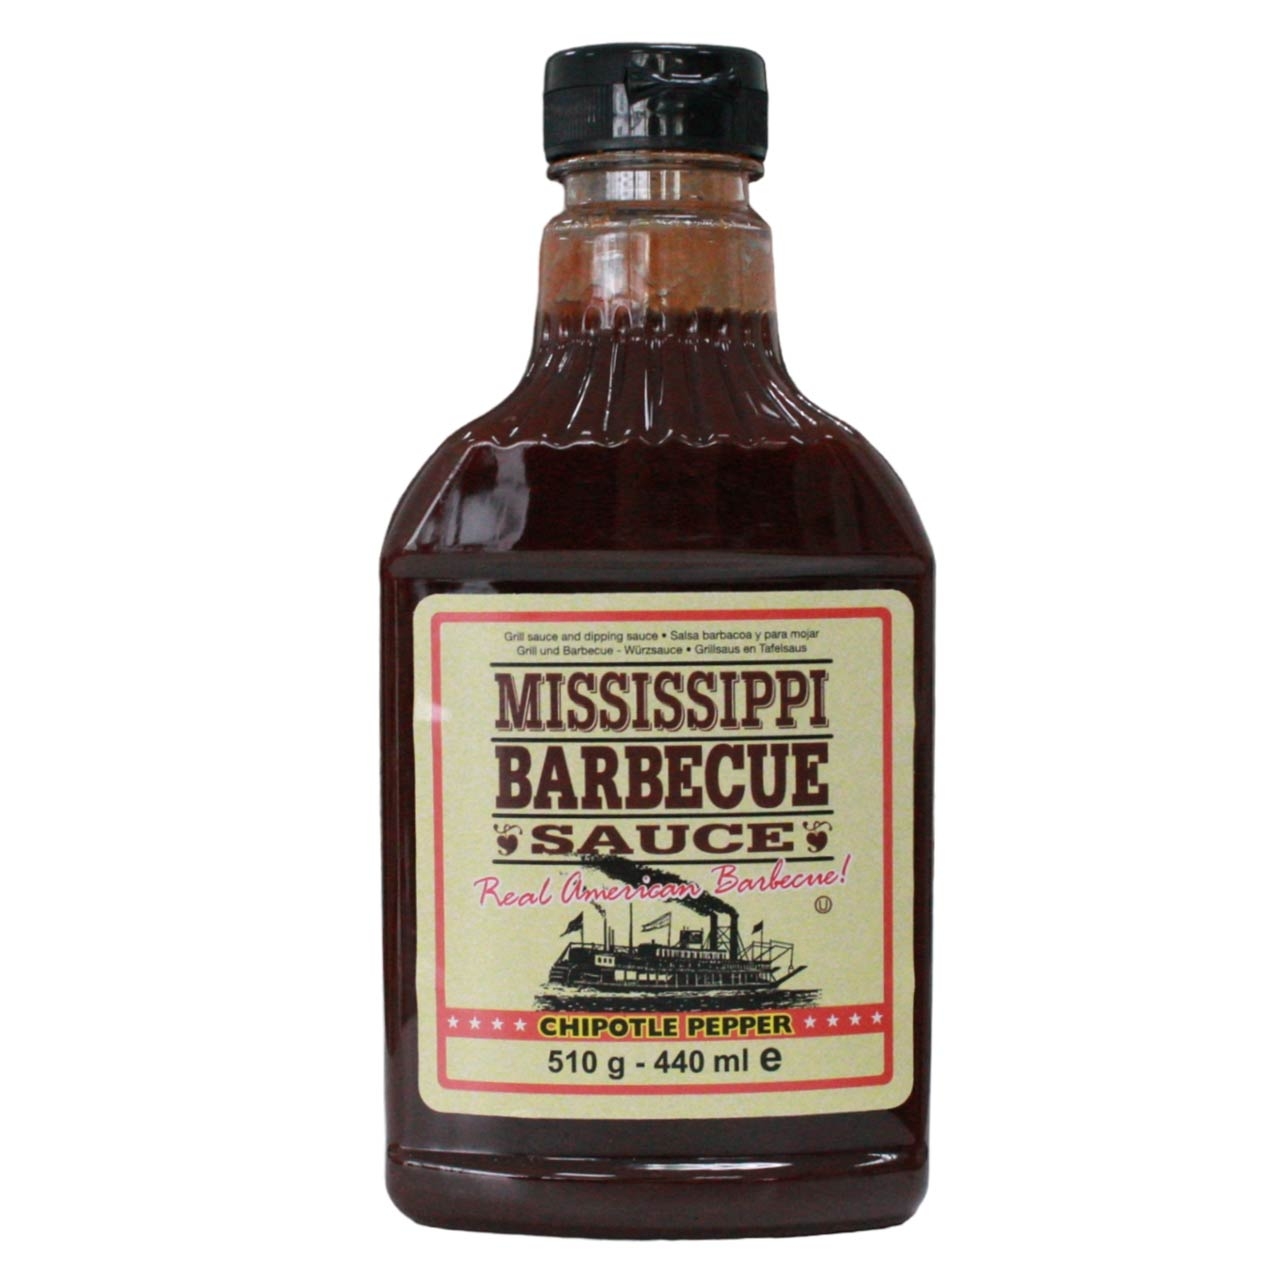 Mississippi Barbecue Sauce Chipotle Pepper 440 ml